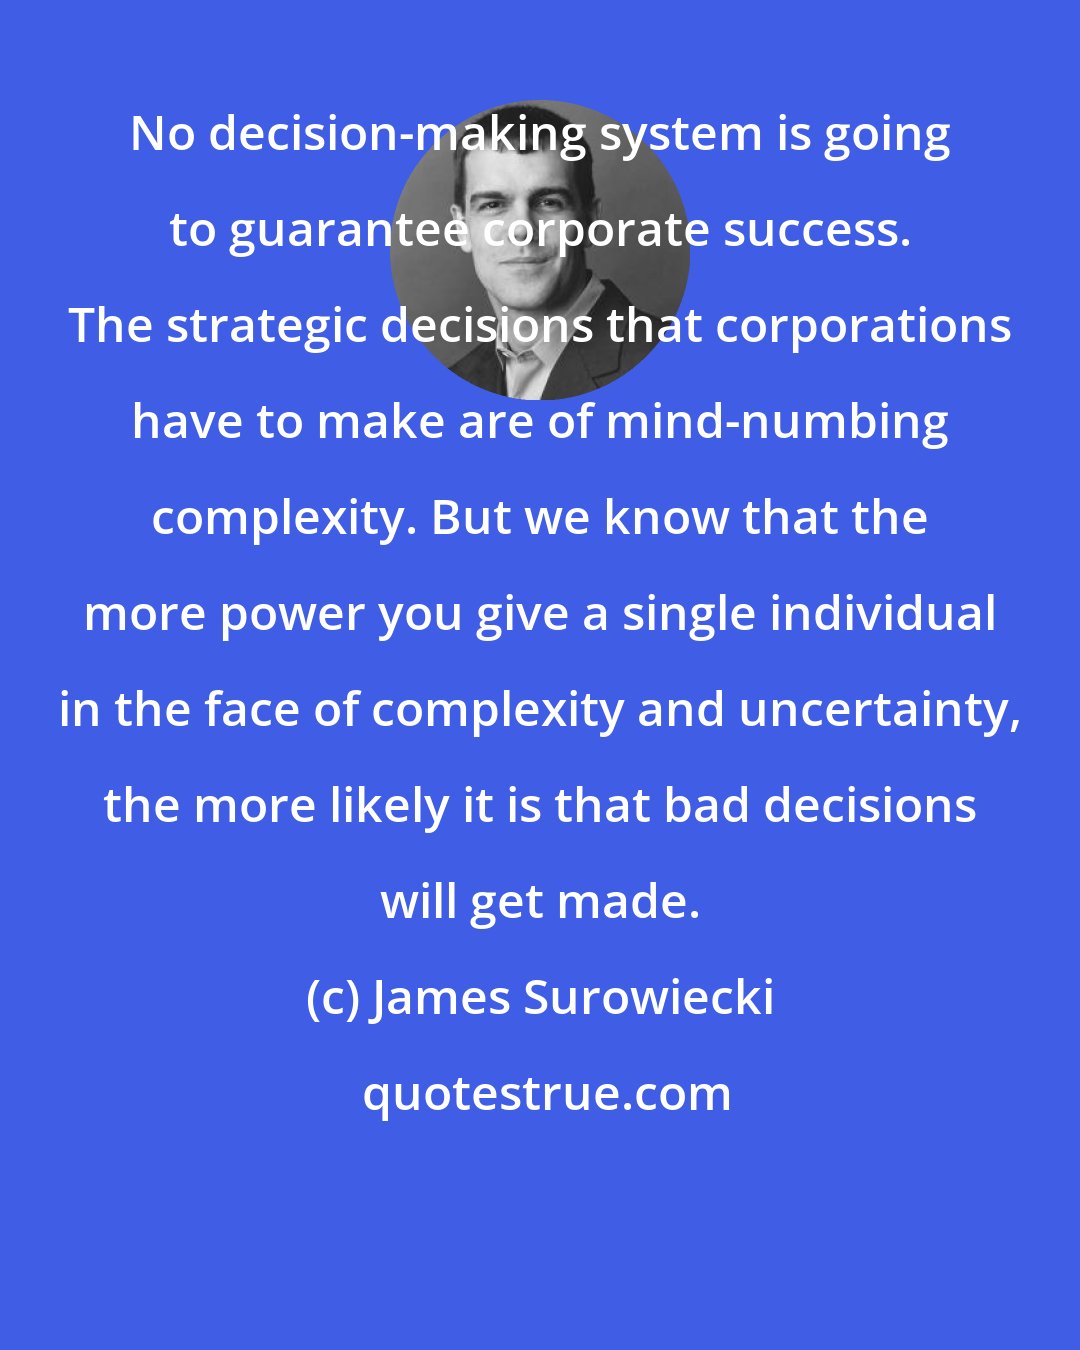 James Surowiecki: No decision-making system is going to guarantee corporate success. The strategic decisions that corporations have to make are of mind-numbing complexity. But we know that the more power you give a single individual in the face of complexity and uncertainty, the more likely it is that bad decisions will get made.